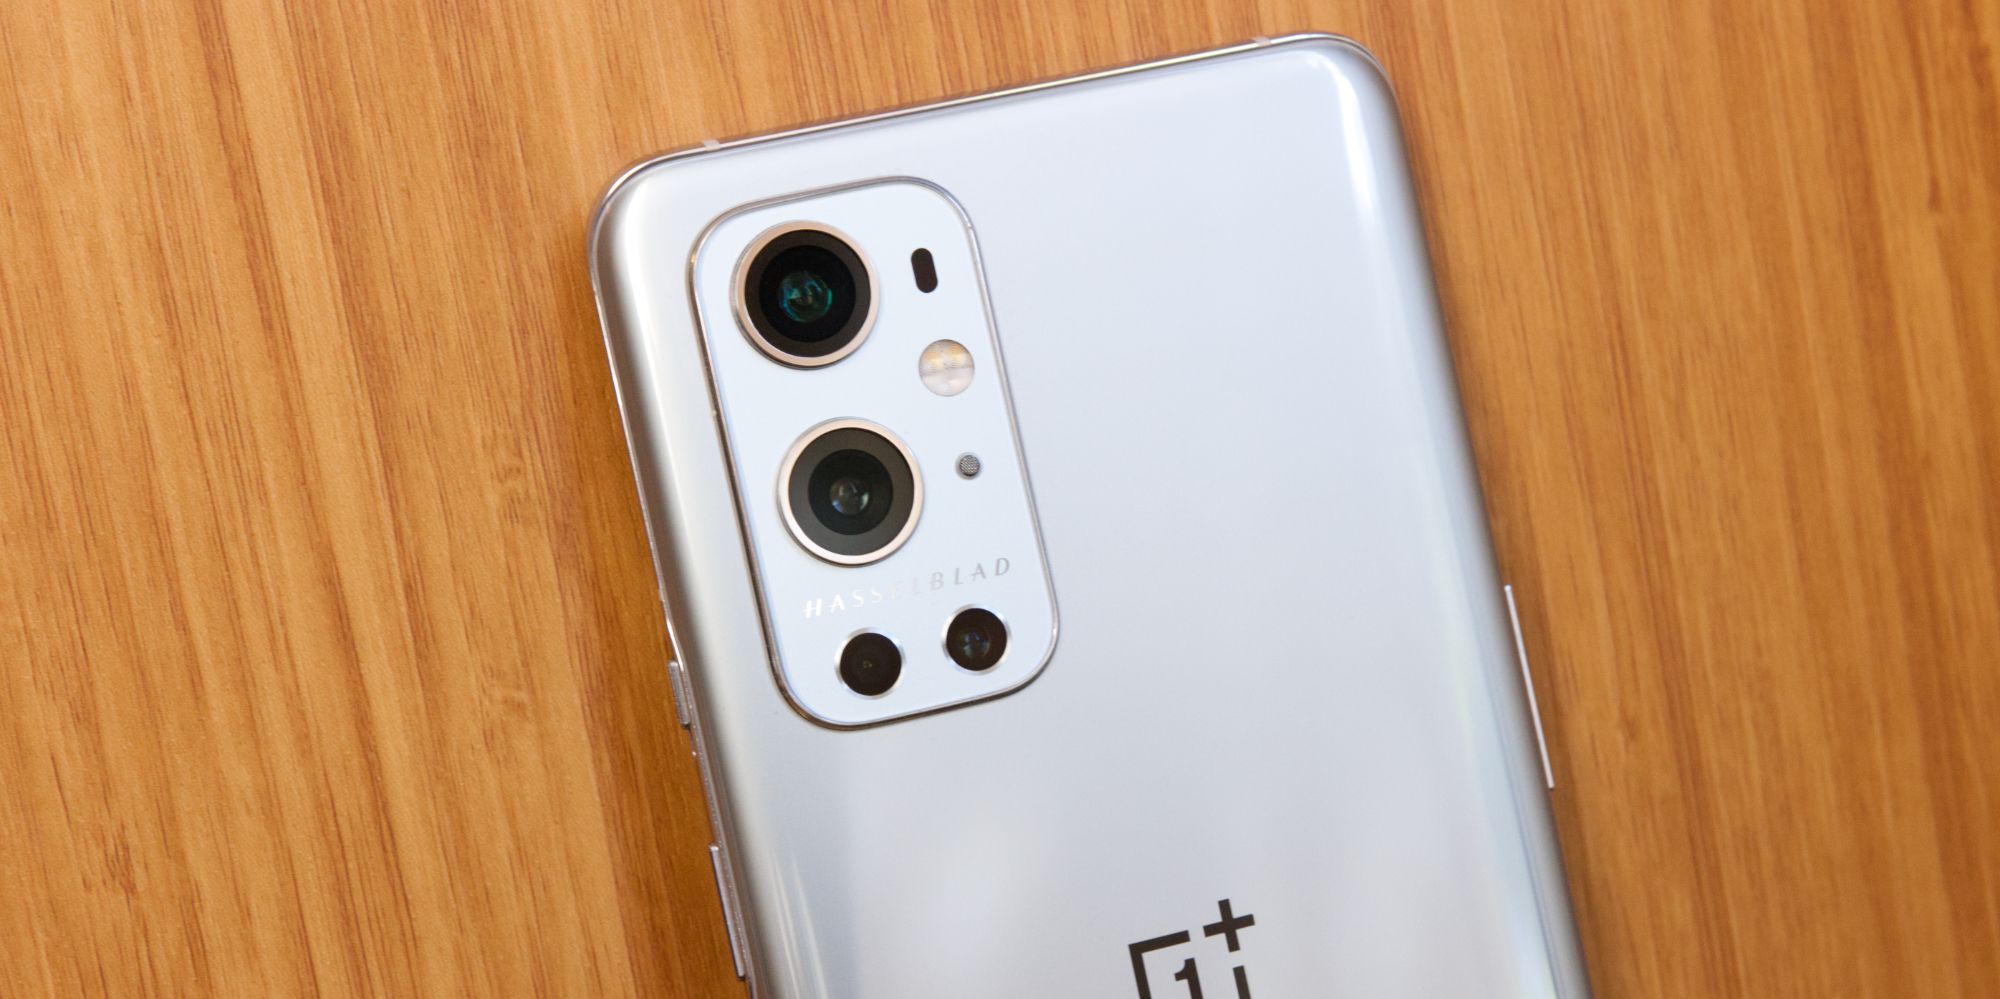 A New Update Is About To Make Your OnePlus 9s Camera Even Better